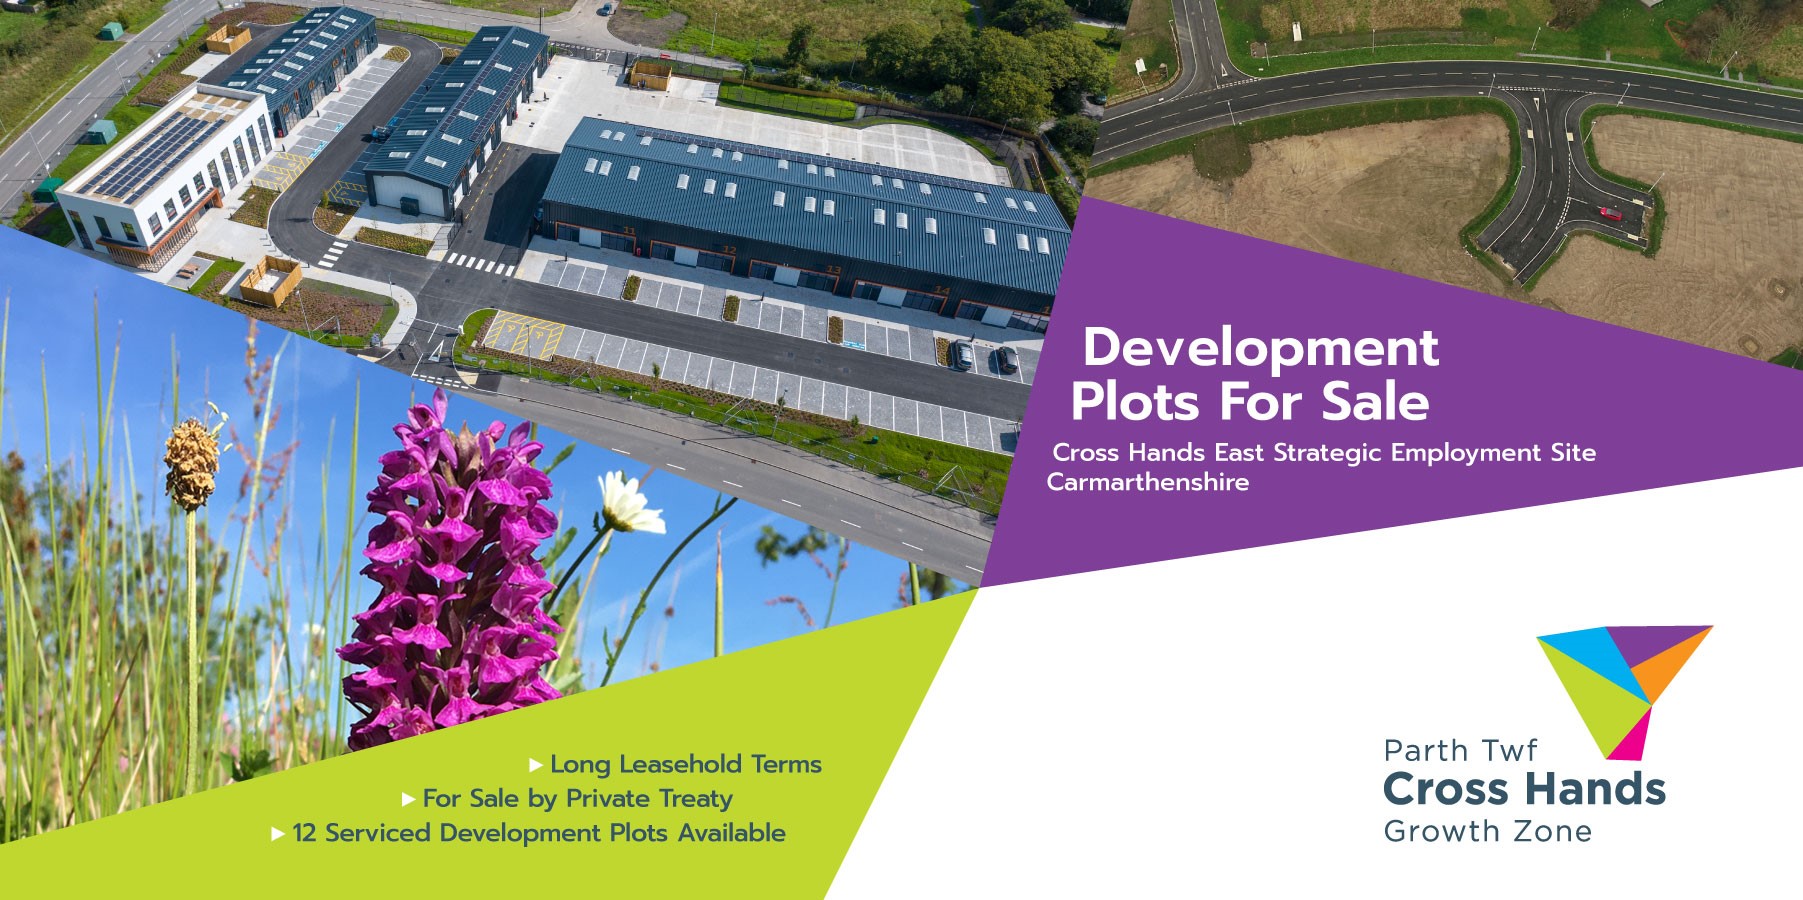 Development Plots for Sale. Cross Hands East Strategic Employment Site, Carmarthenshire. Long Leasehold Terms - For Sale by Private Treaty - 12 Serviced Development Plots Available. Parth Two Cross Hands Growth Zone